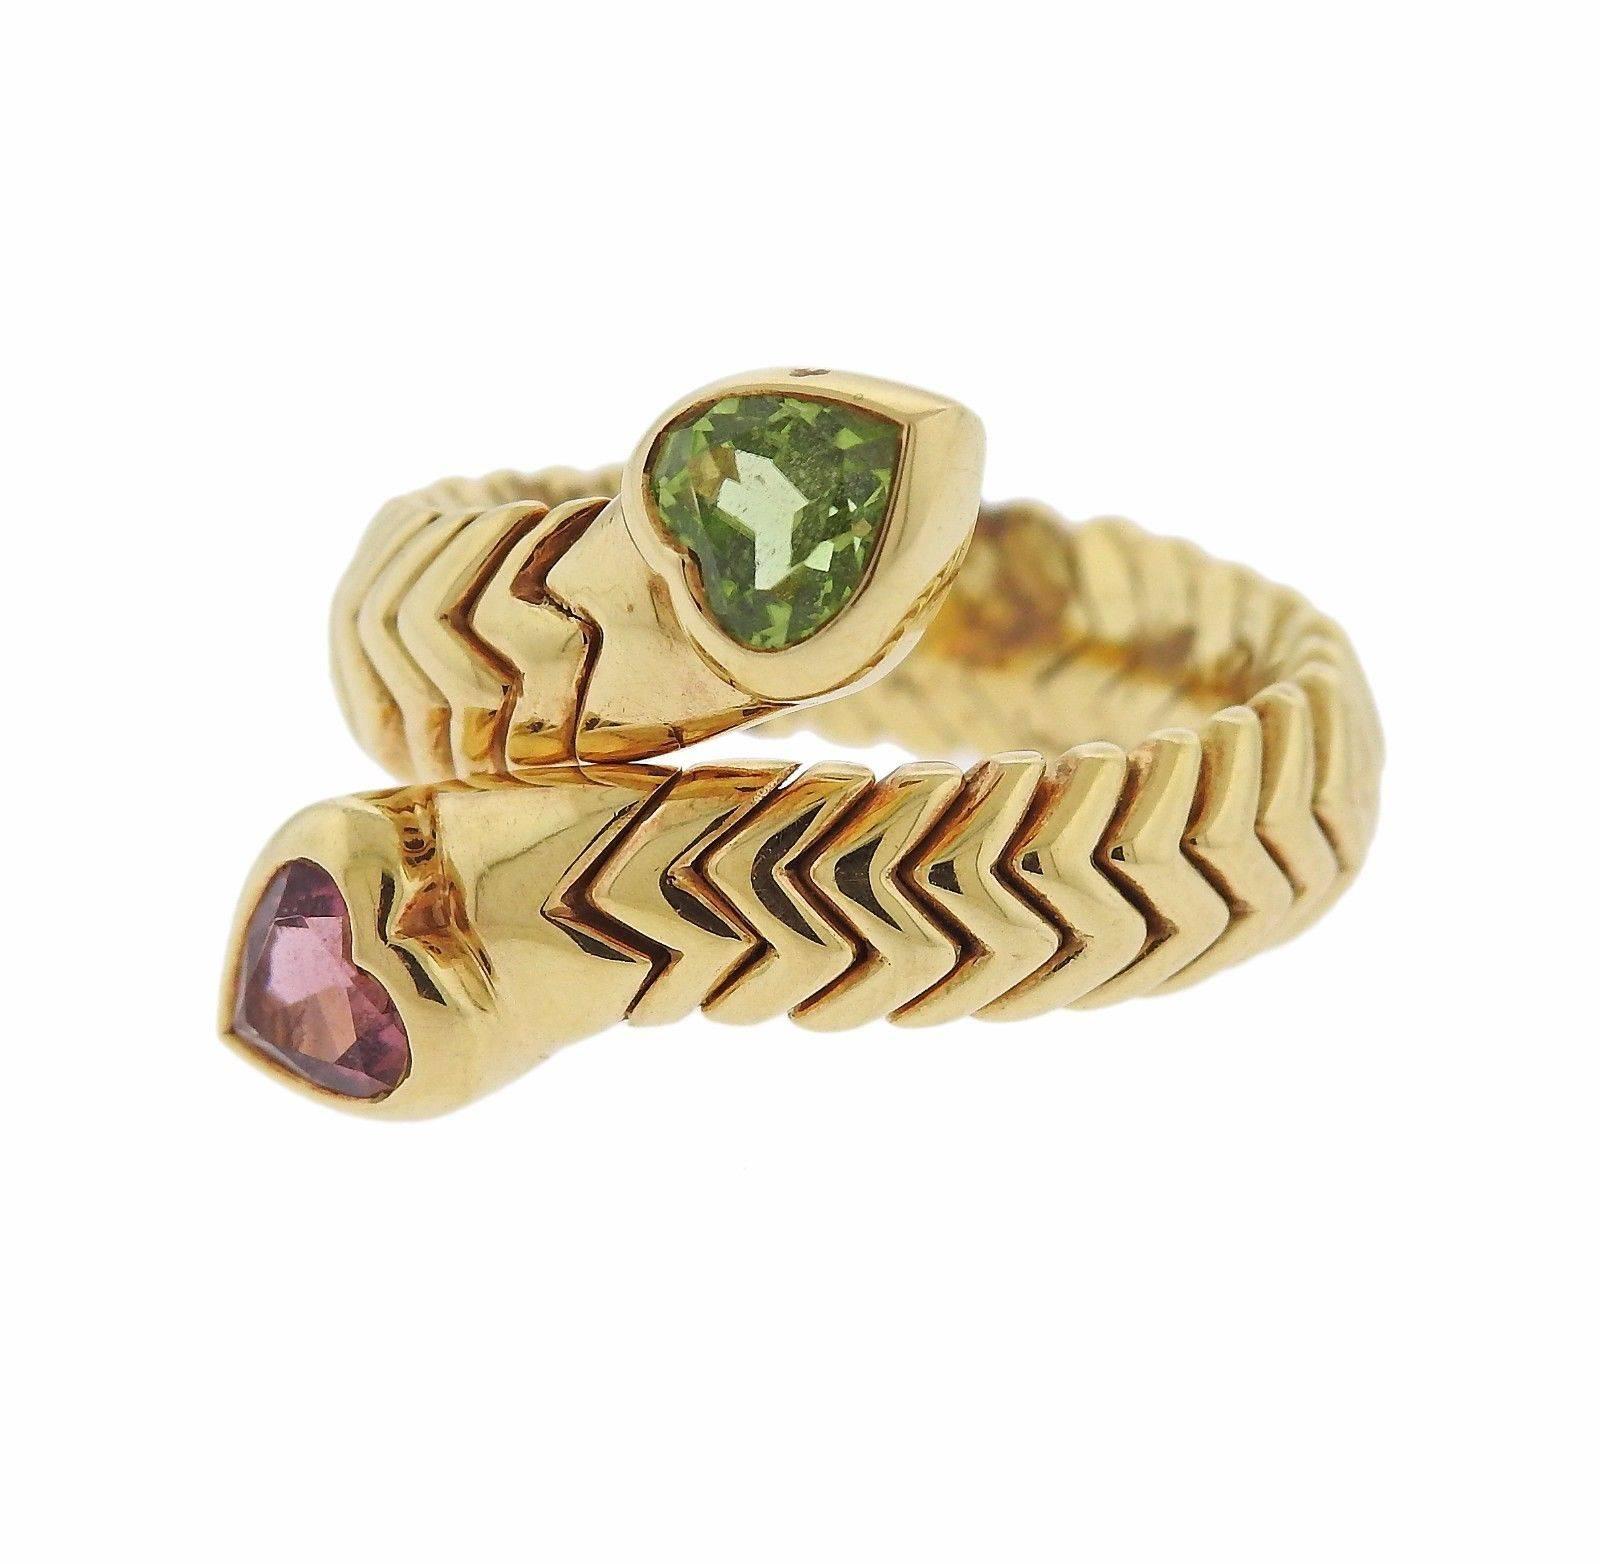 An 18k yellow gold ring set with pink tourmaline and peridot.  The ring is a size 6 1/2 and the top is 20mm wide.  The weight of the piece is 13.6 grams. Marked: 750, Bvlgari.